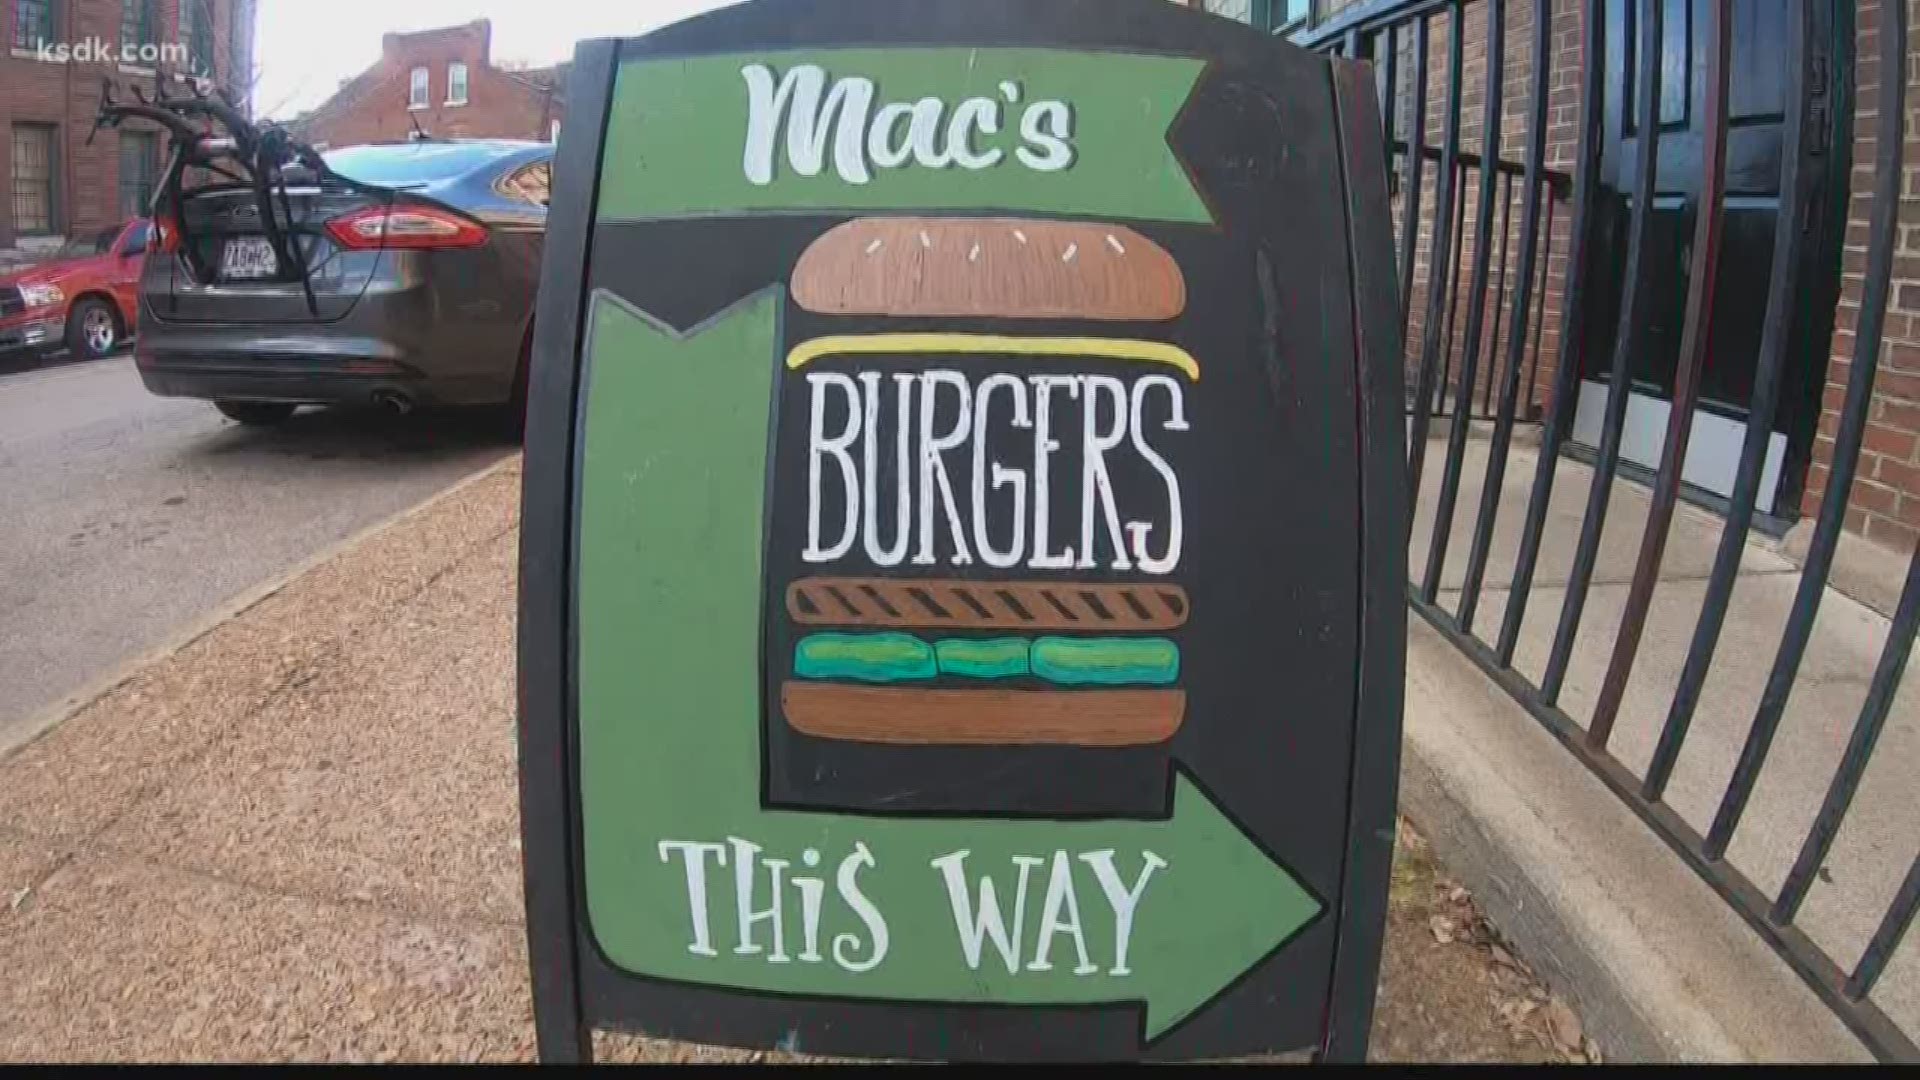 According to Food and Wine Magazine, Mac's Local Eats is one of the best.